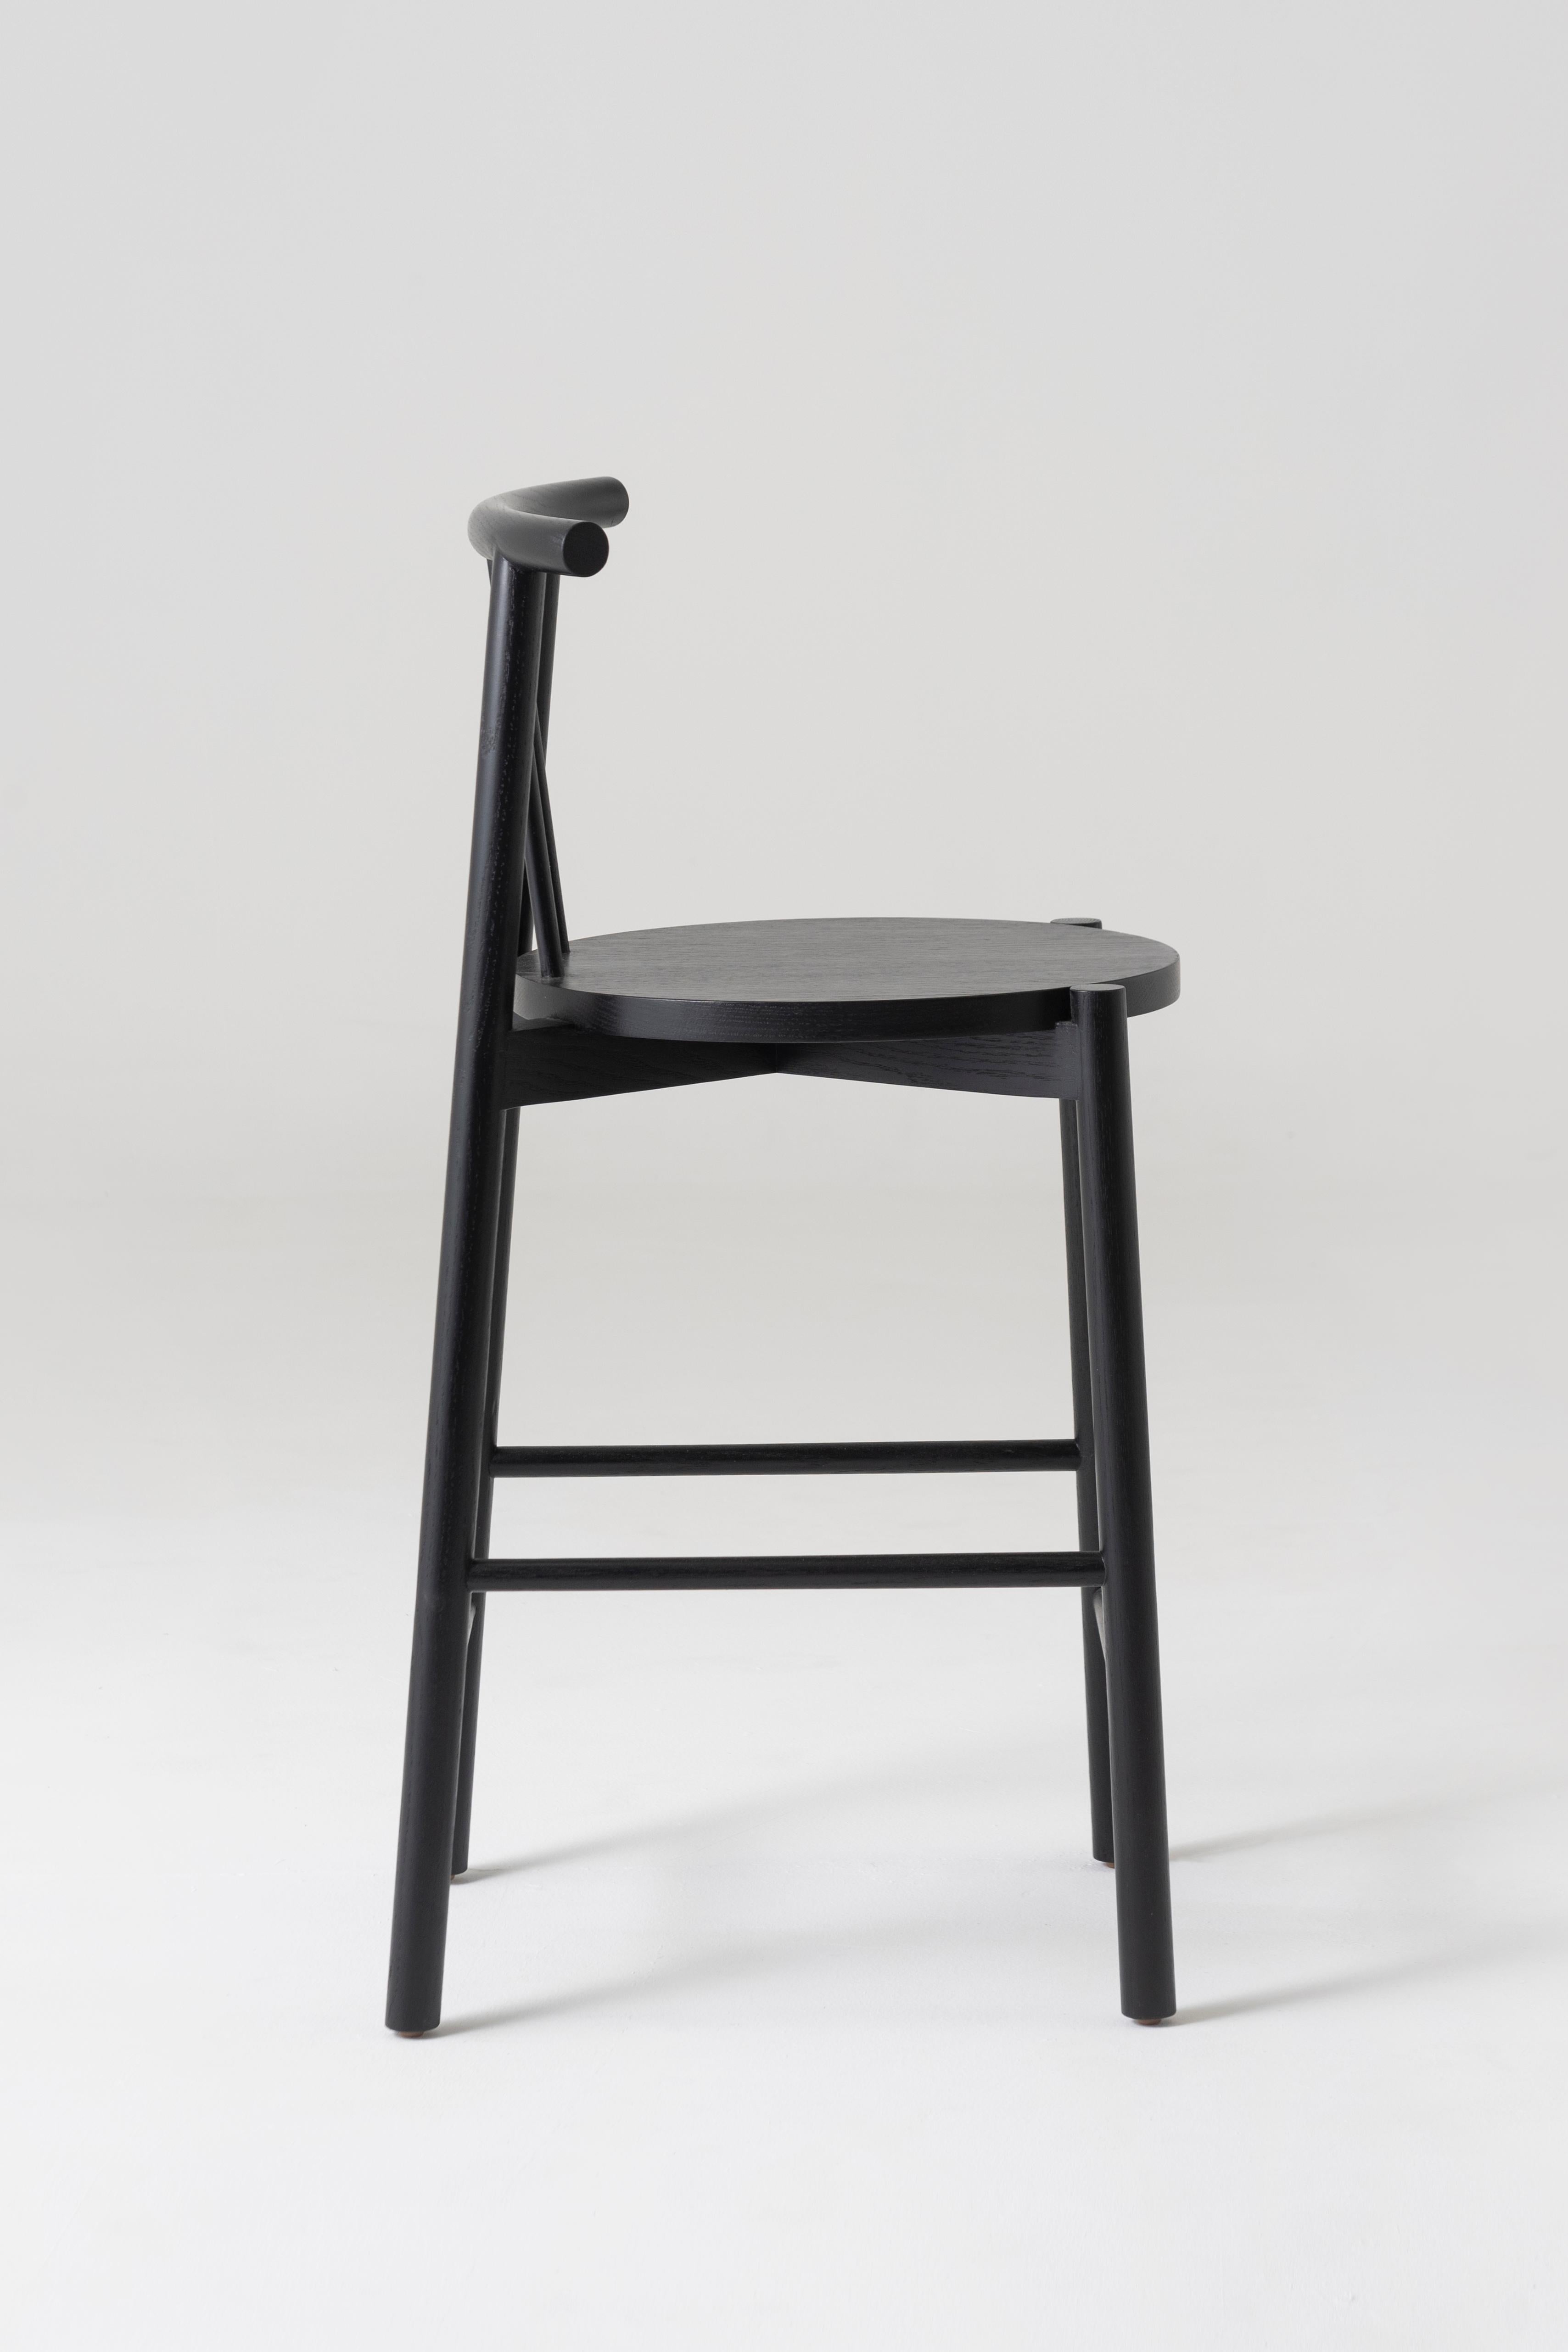 Minimalist Black Stool Crafted in Solid Oak Wood For Sale